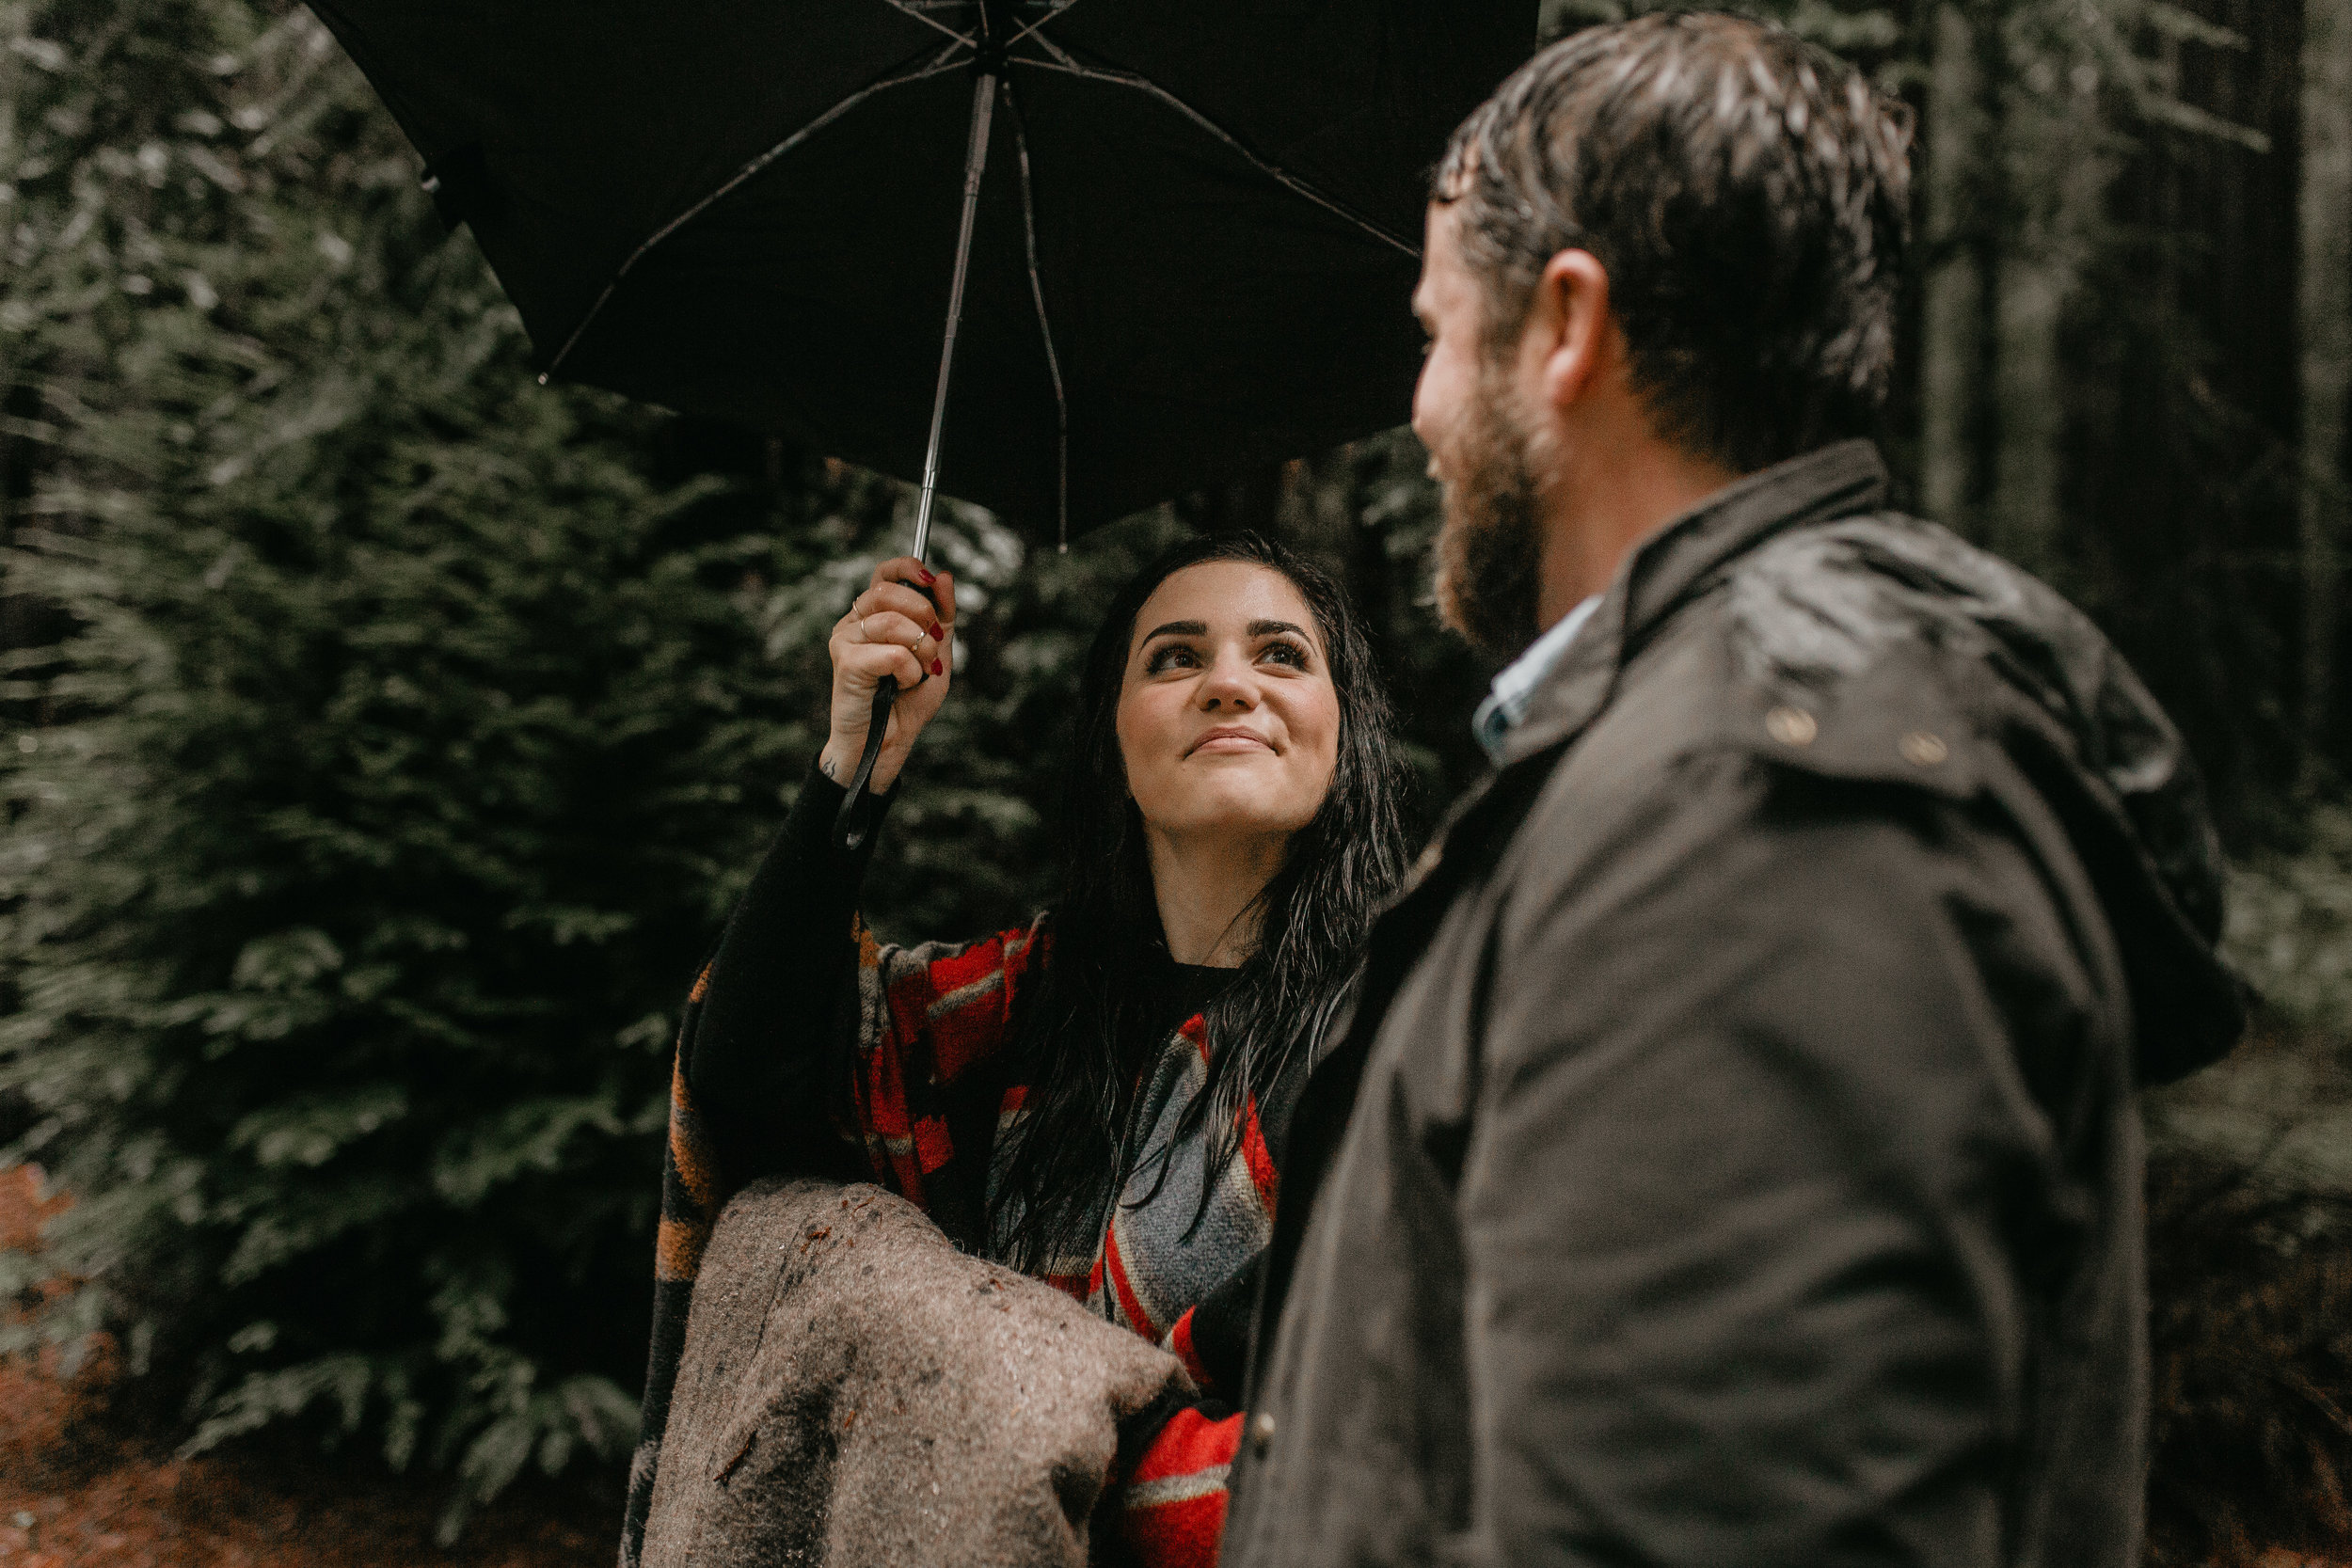 nicole-daacke-photography-redwoods-national-park-forest-rainy-foggy-adventure-engagement-session-humboldt-county-old-growth-redwood-tree-elopement-intimate-wedding-photographer-30.jpg